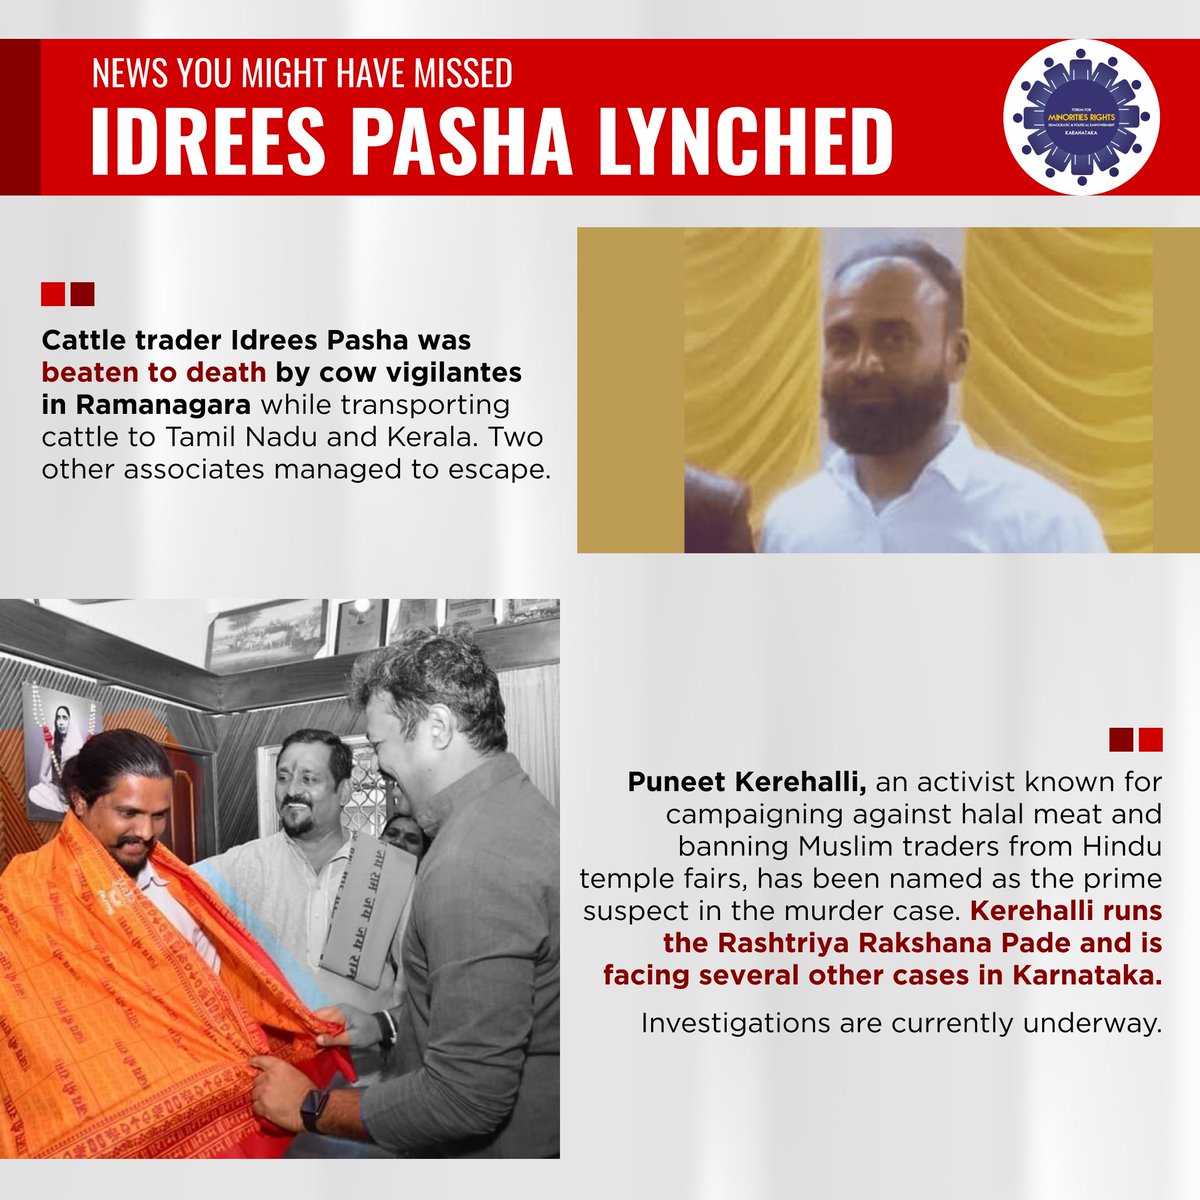 Some stories are not covered by the media and here is one such.
#IdreesPasha, a Muslim cattle trader is the victim from Ramnagara, #Karnataka  and was allegedly killed by Puneet Kerehalli, a right wing activist.

#IdreesPasha #ramnagar  #PuneethKerehalli  #HateCrime #lynched